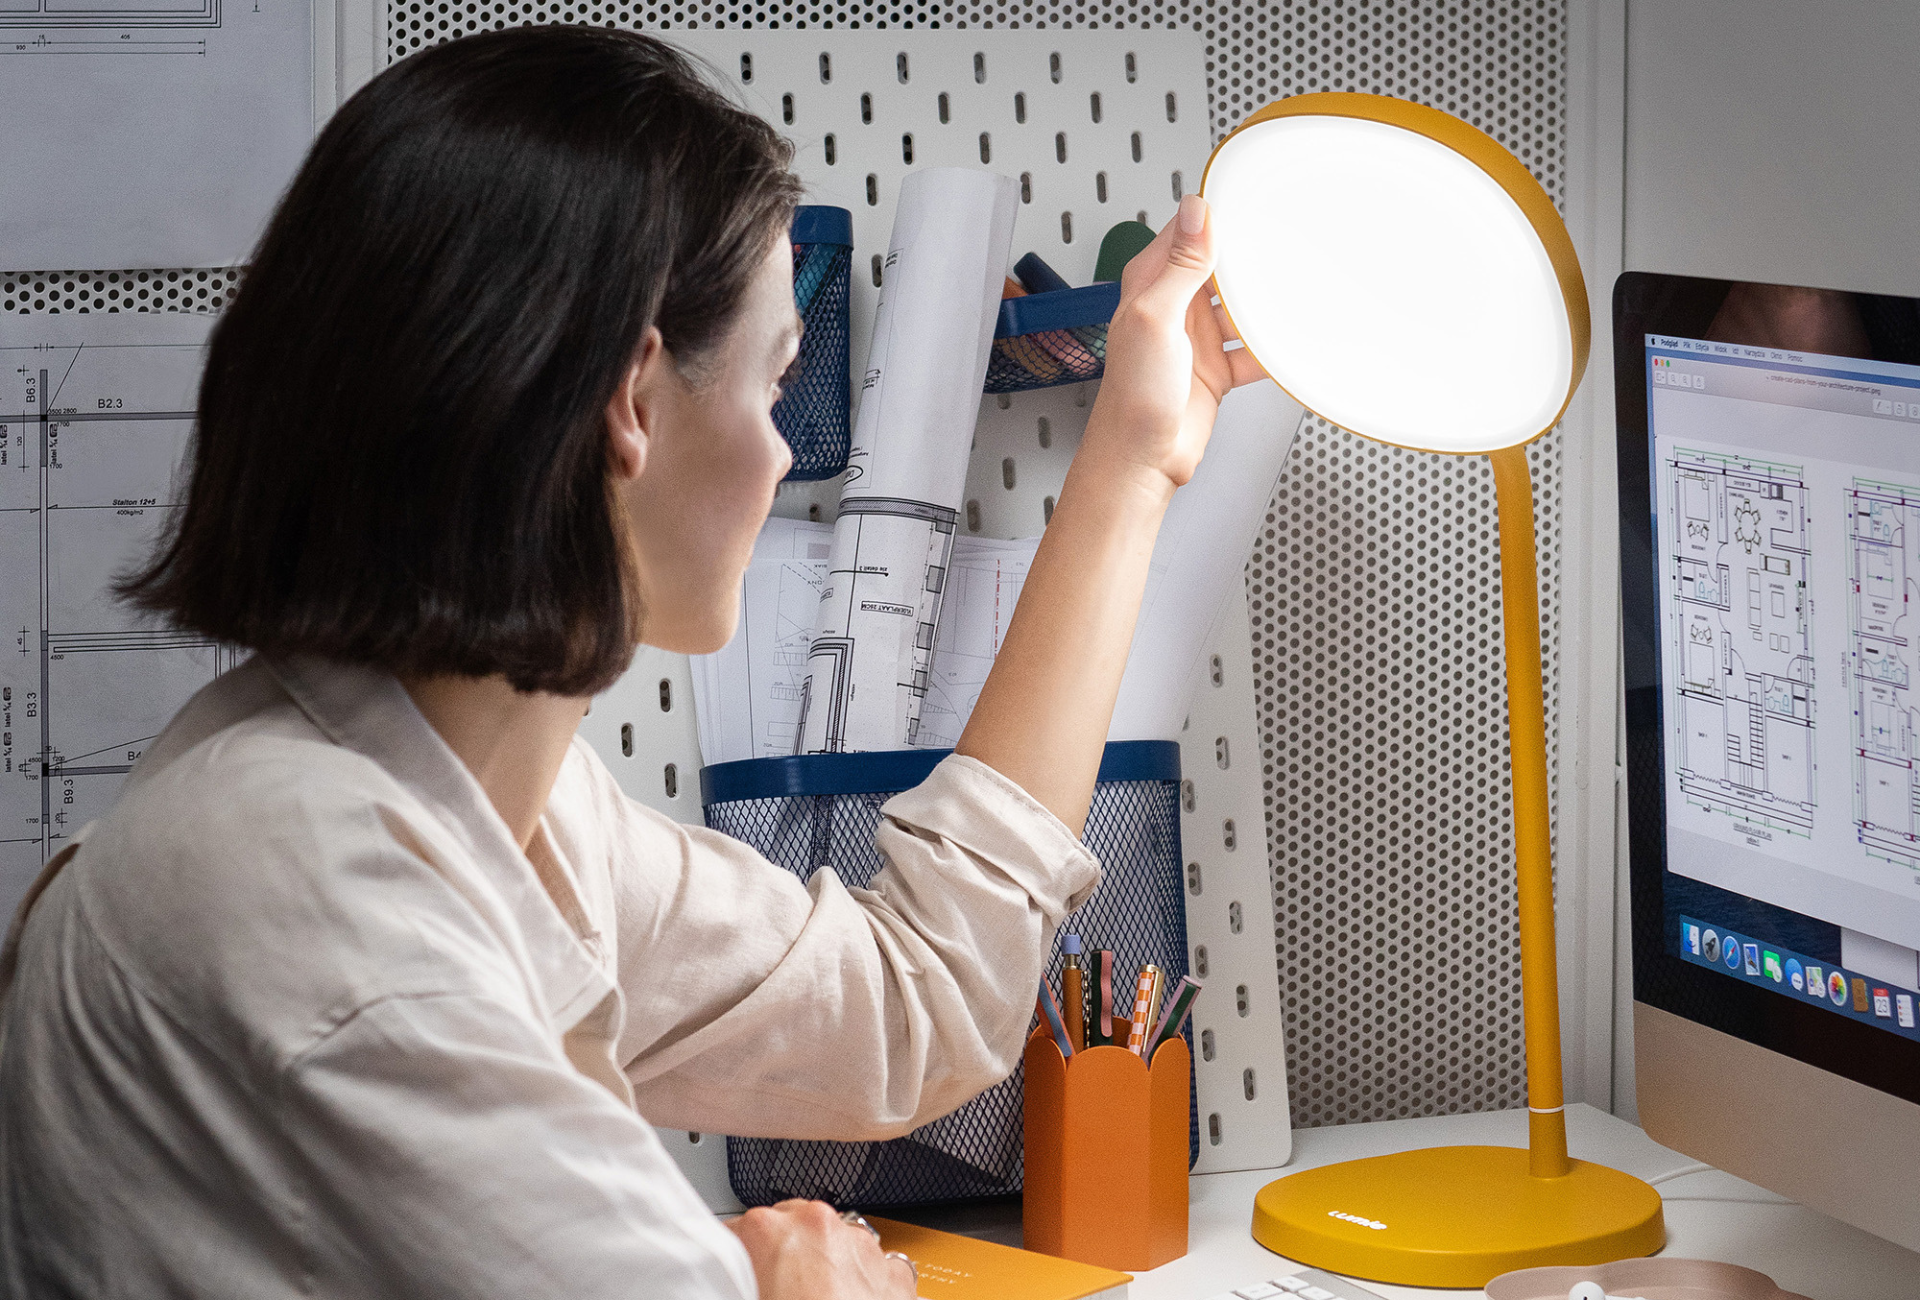 Light therapy workshop: a new perspective on health in the workplace